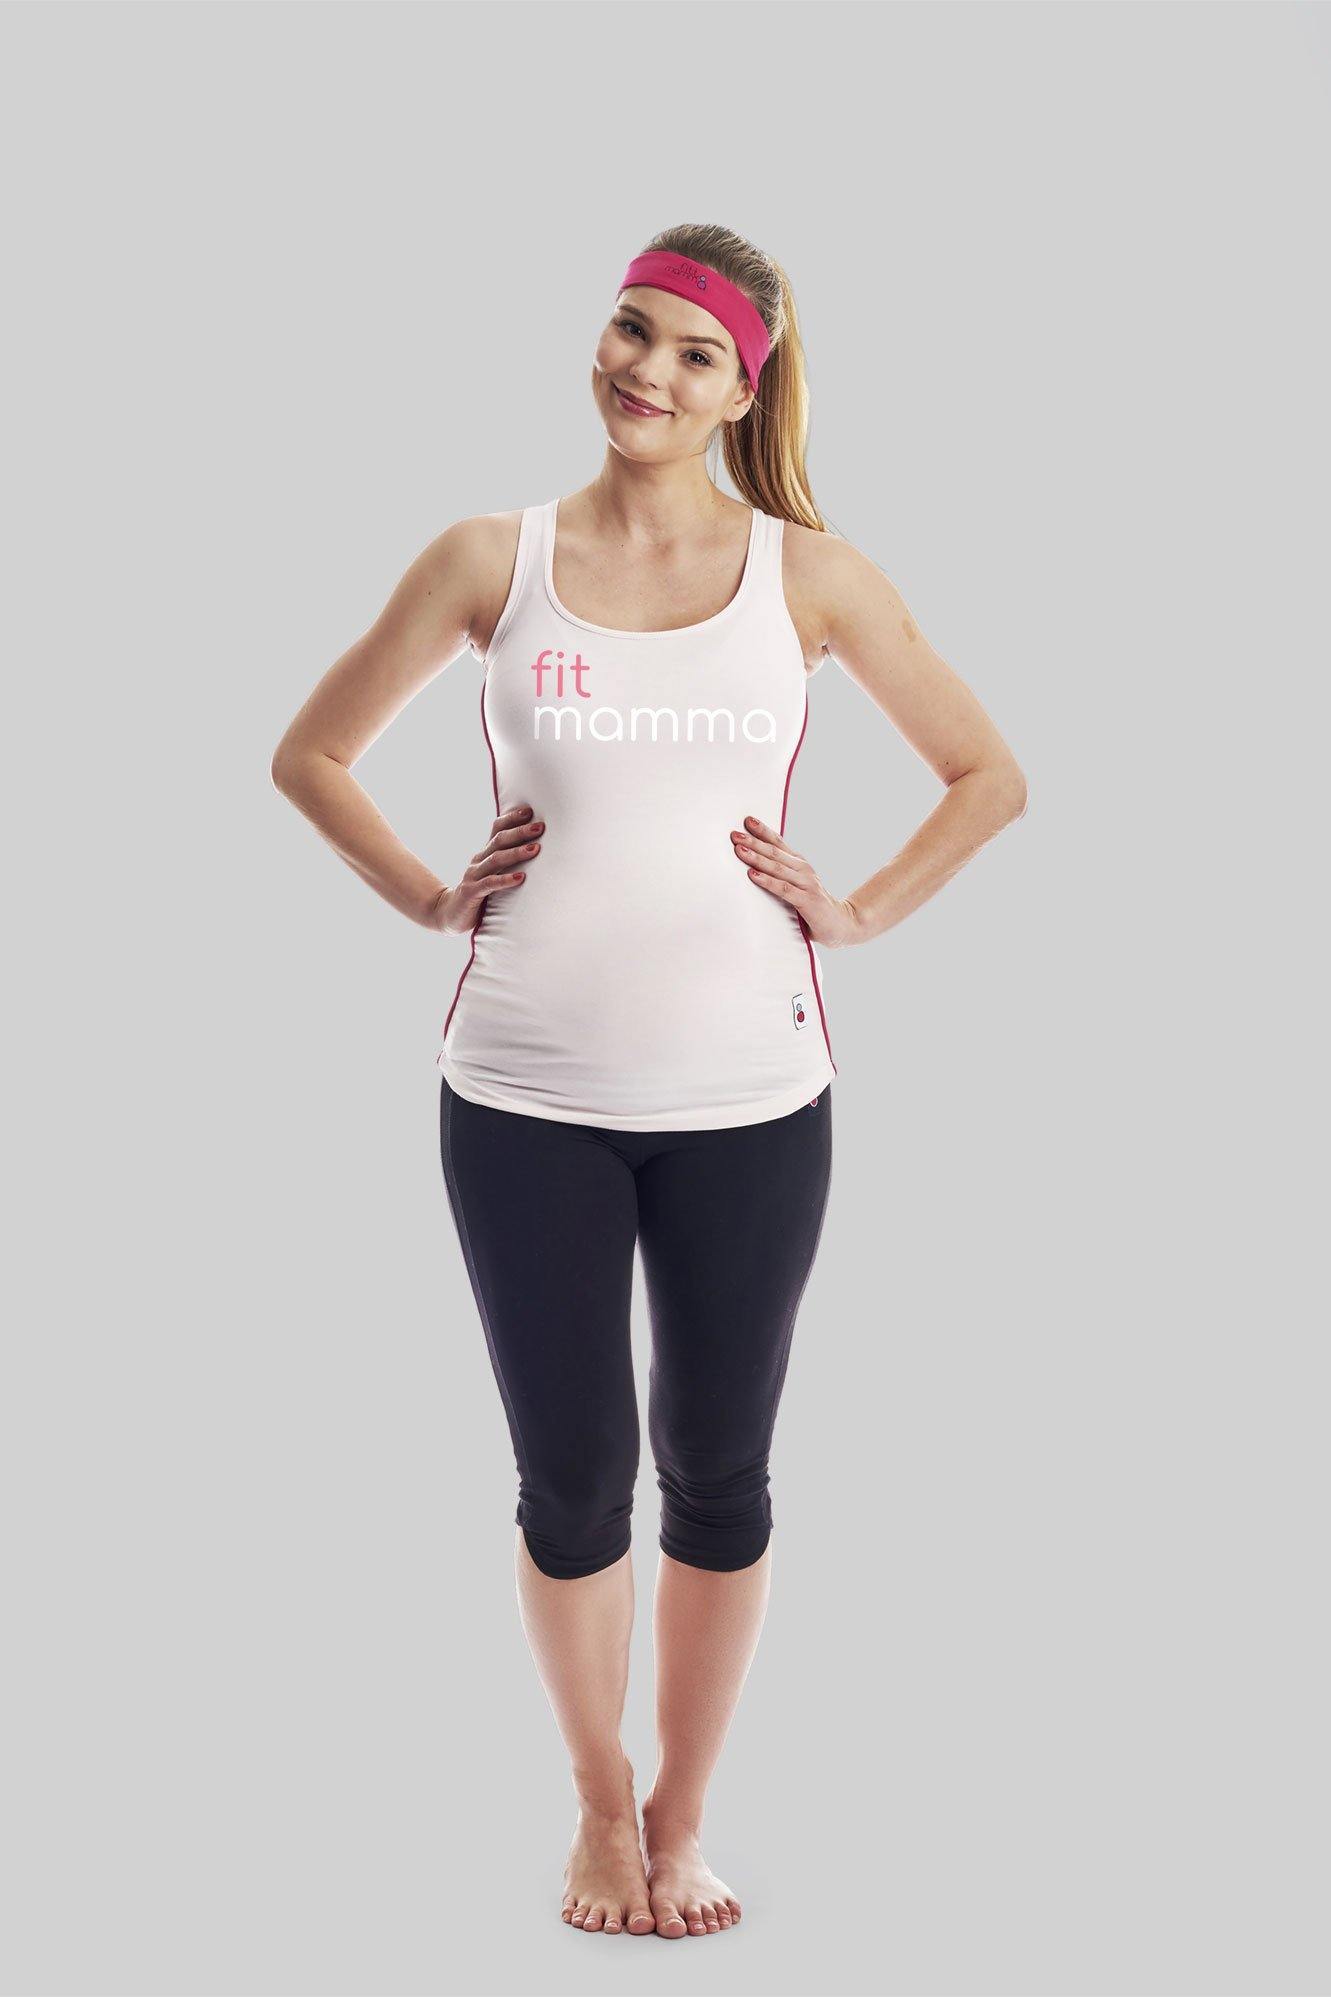 Maternity Workout Support Top, Postnatal Activewear